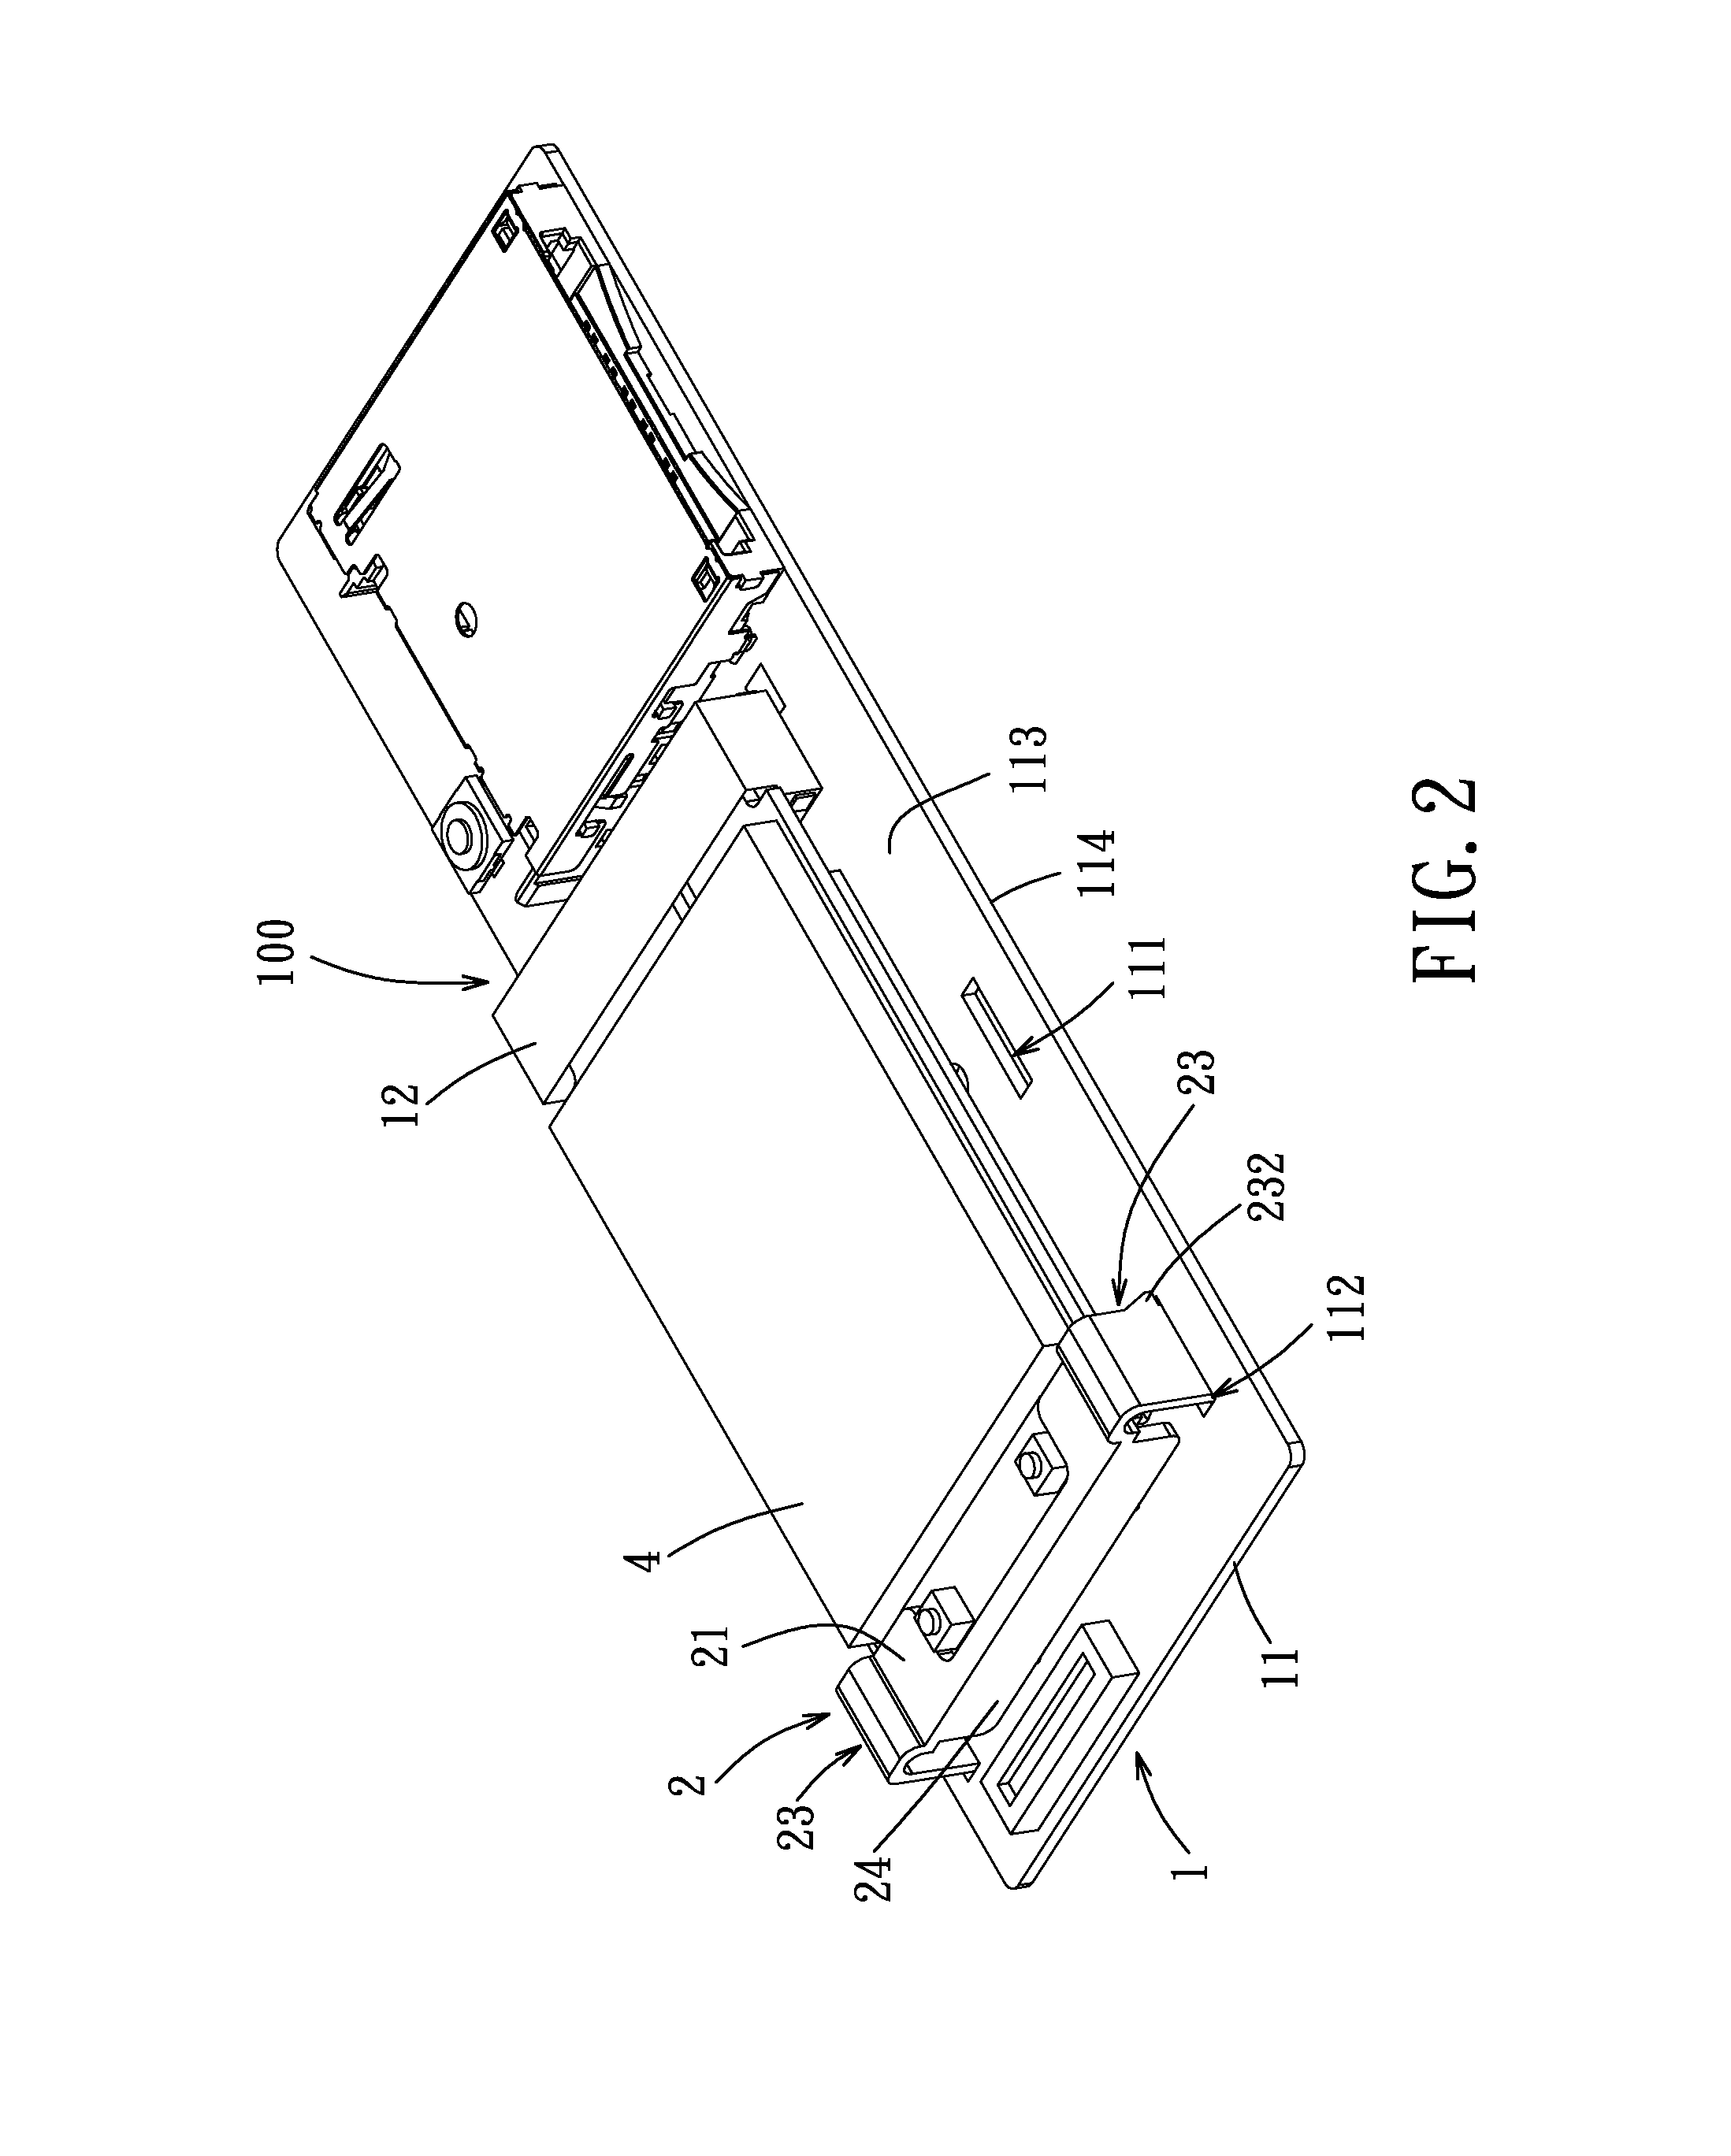 Circuit board device and a combined circuit board and electronic card assembly